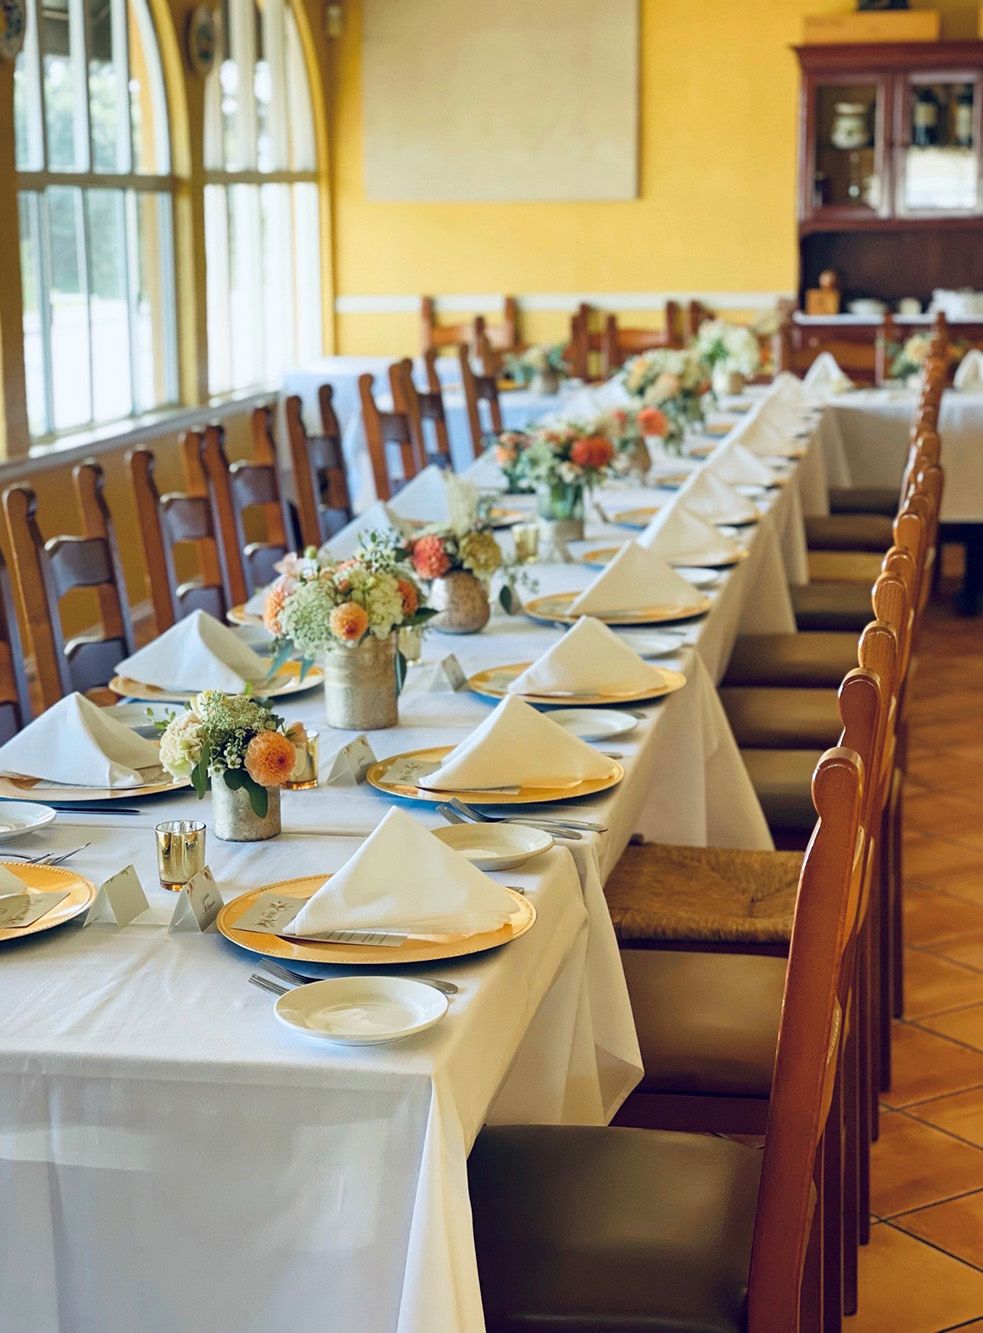 mezzaluna small banquet room showing long table with gold chargers, small floral arrangements, and candles